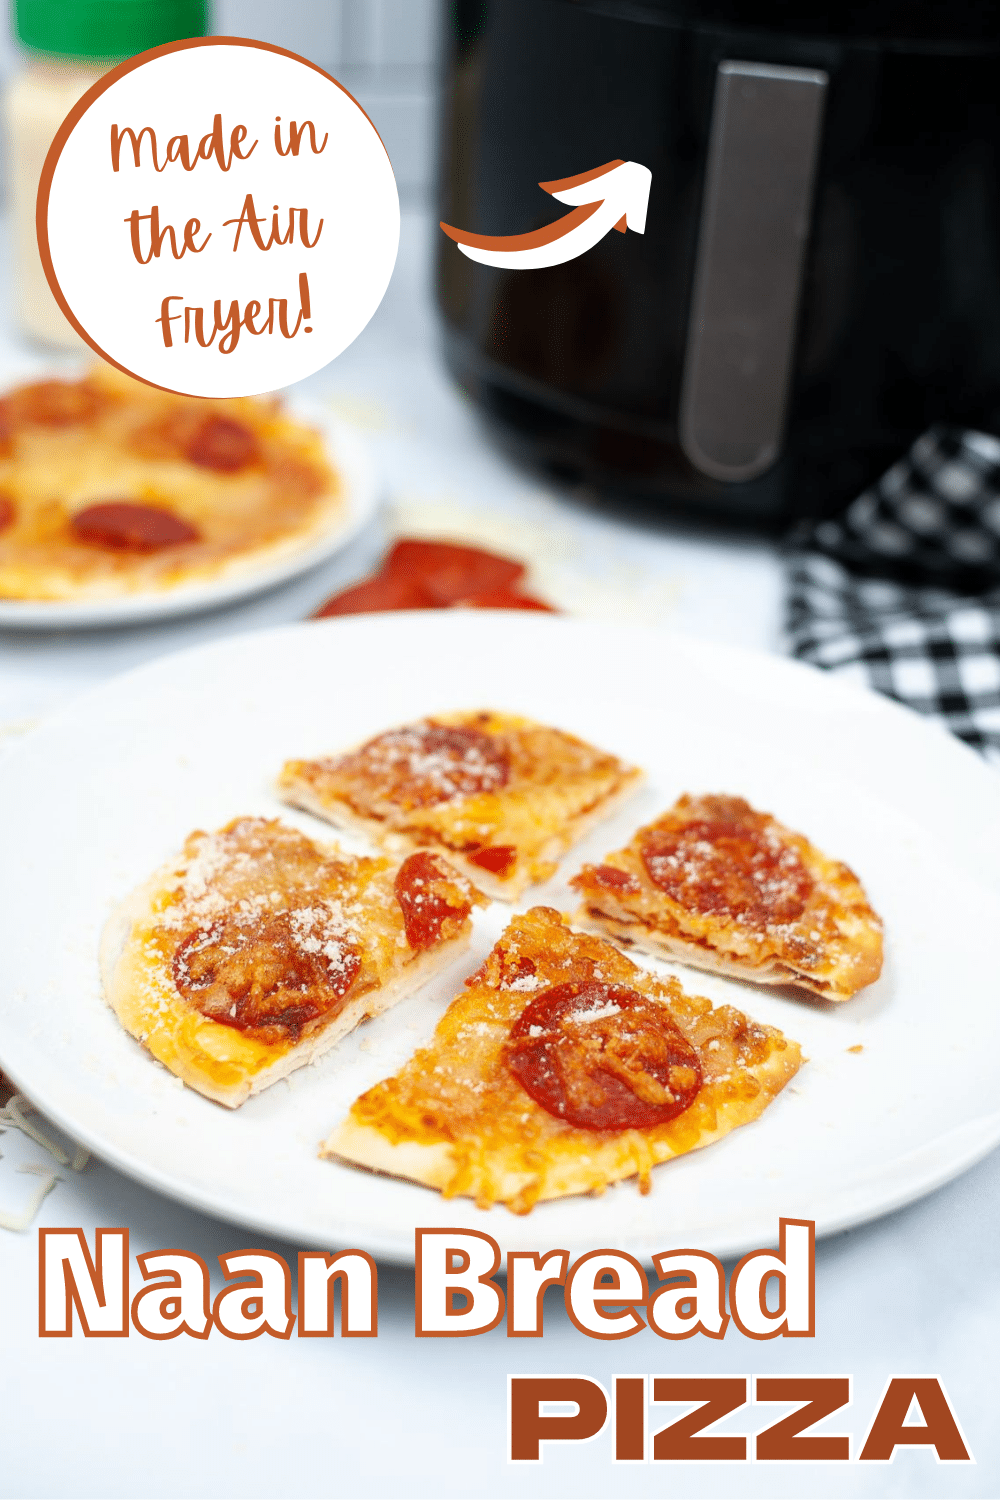 Air Fryer Naan Bread Pizza is a perfectly crisp pizza topped with your favorite pizza toppings. This delicious meal cooks in 30 minutes! #airfryer #naan #naanbread #pizza #recipe via @wondermomwannab